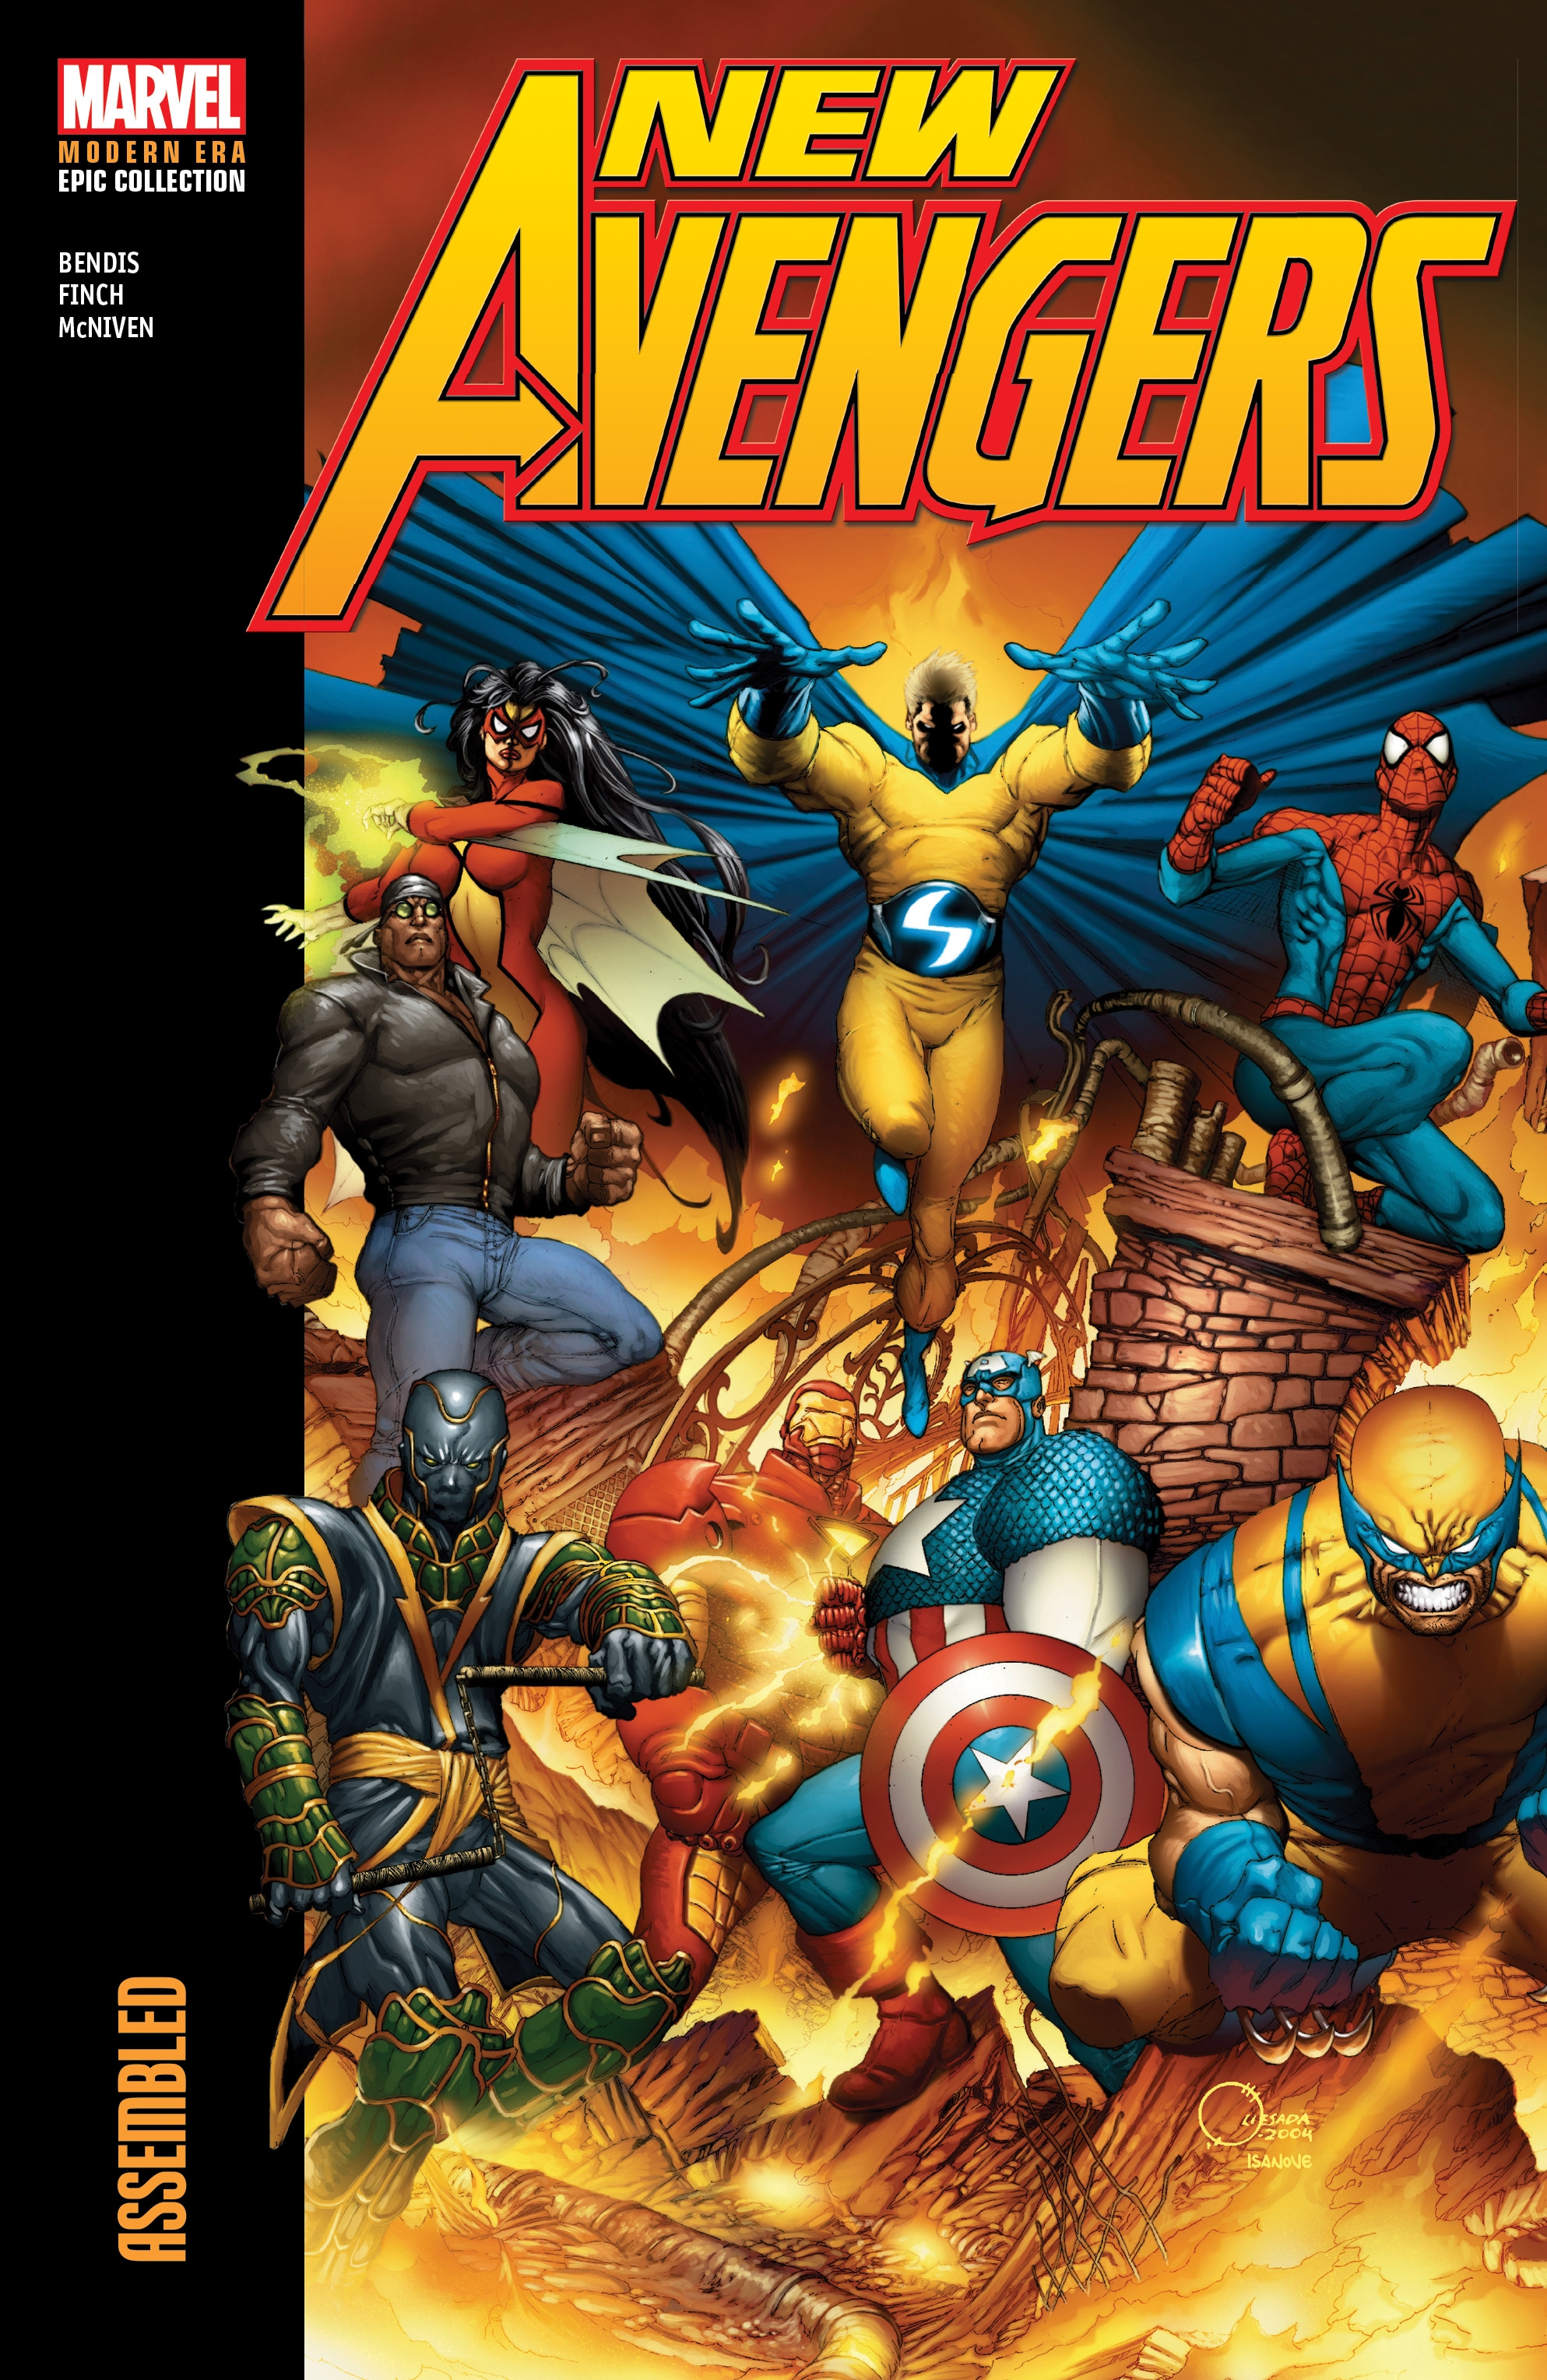 CLASSIC MARVEL EPIC COLLECTION: What's been released, and what's